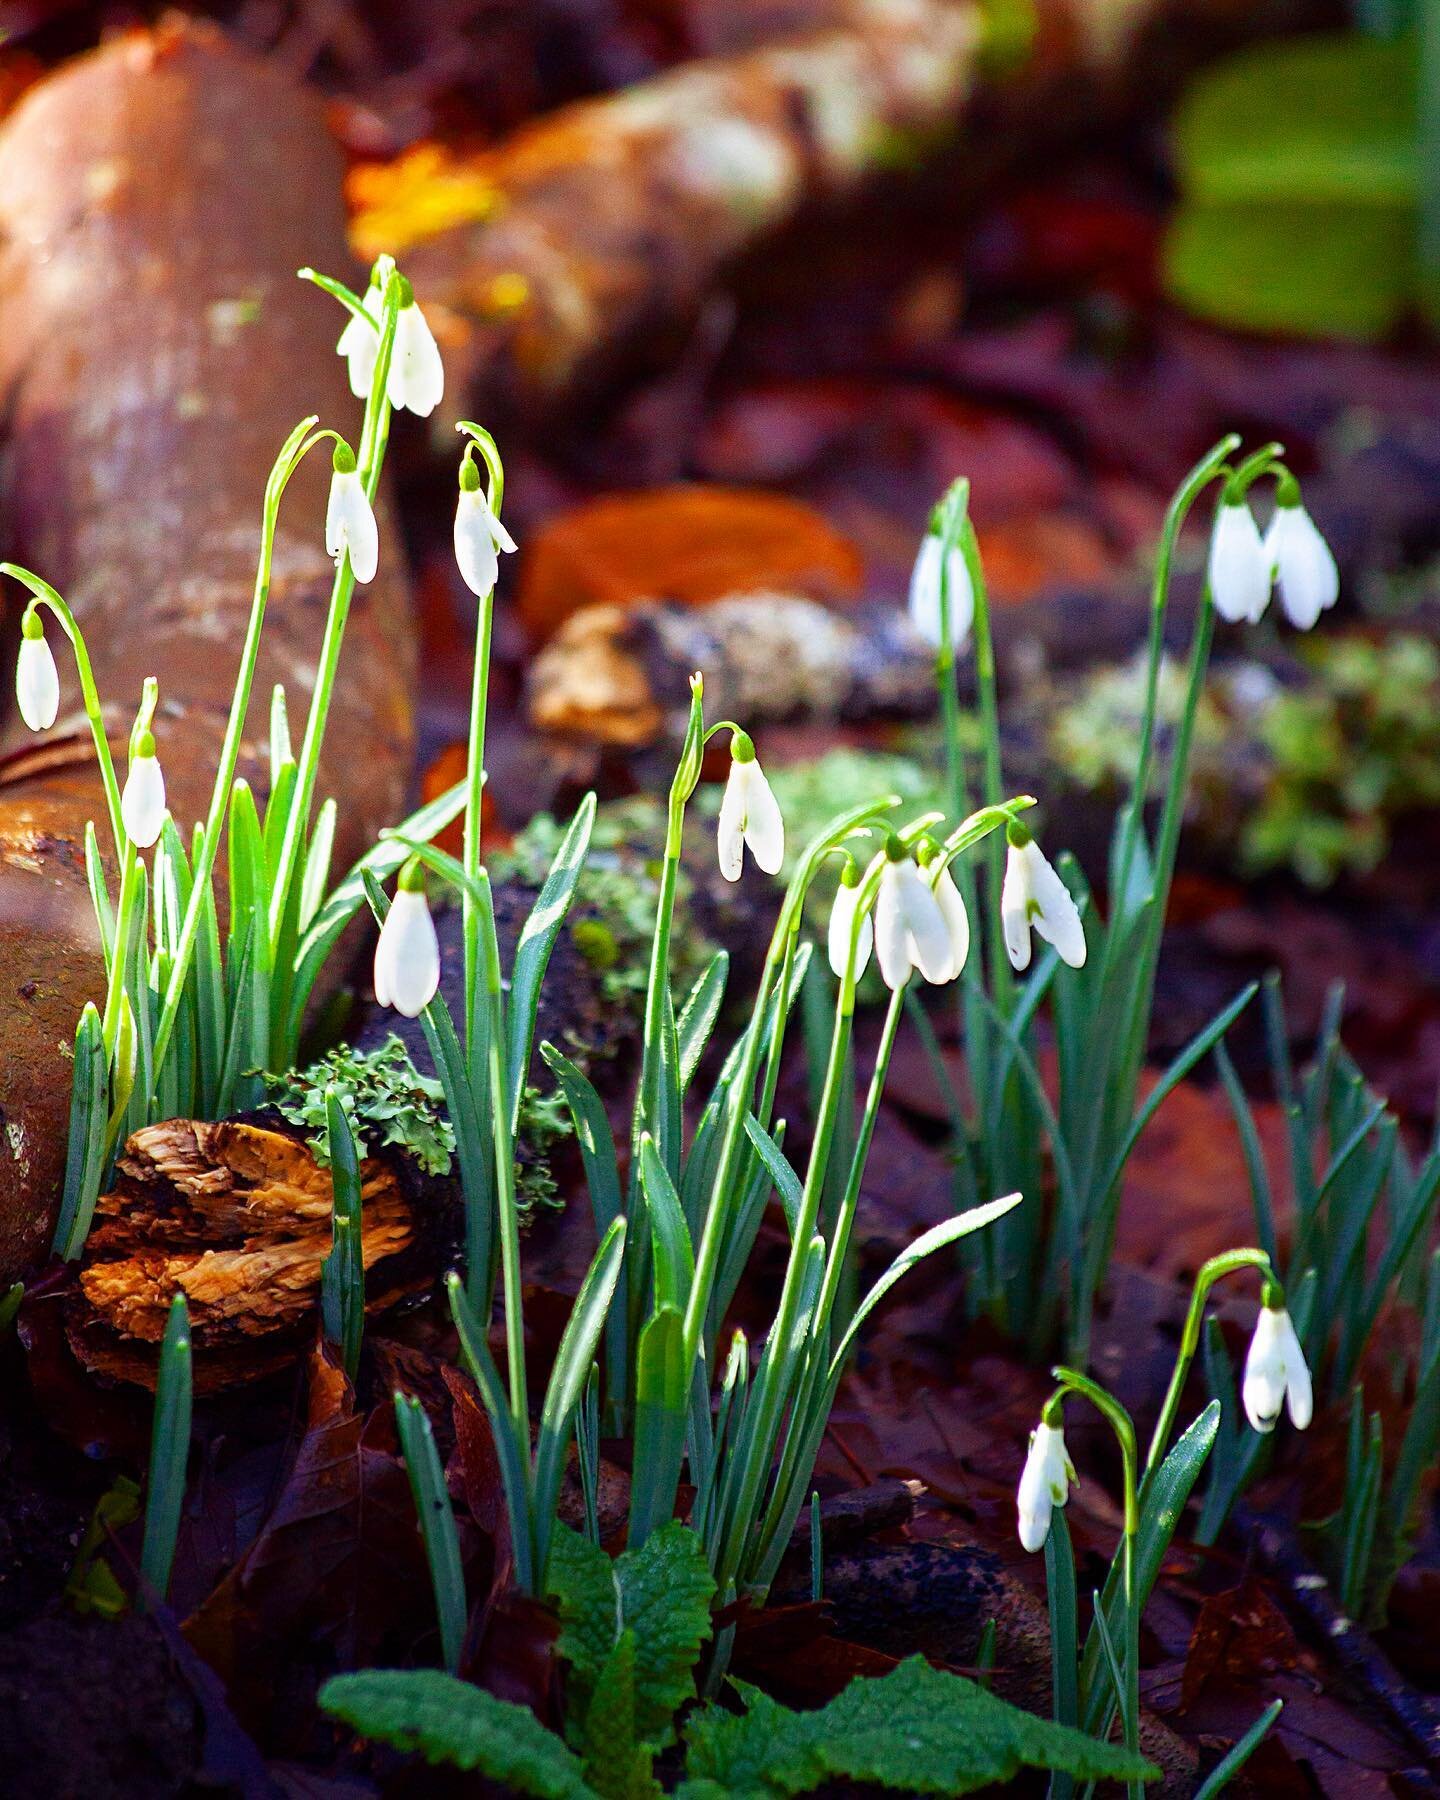 #snowdrops more like Snowdroops 🌱